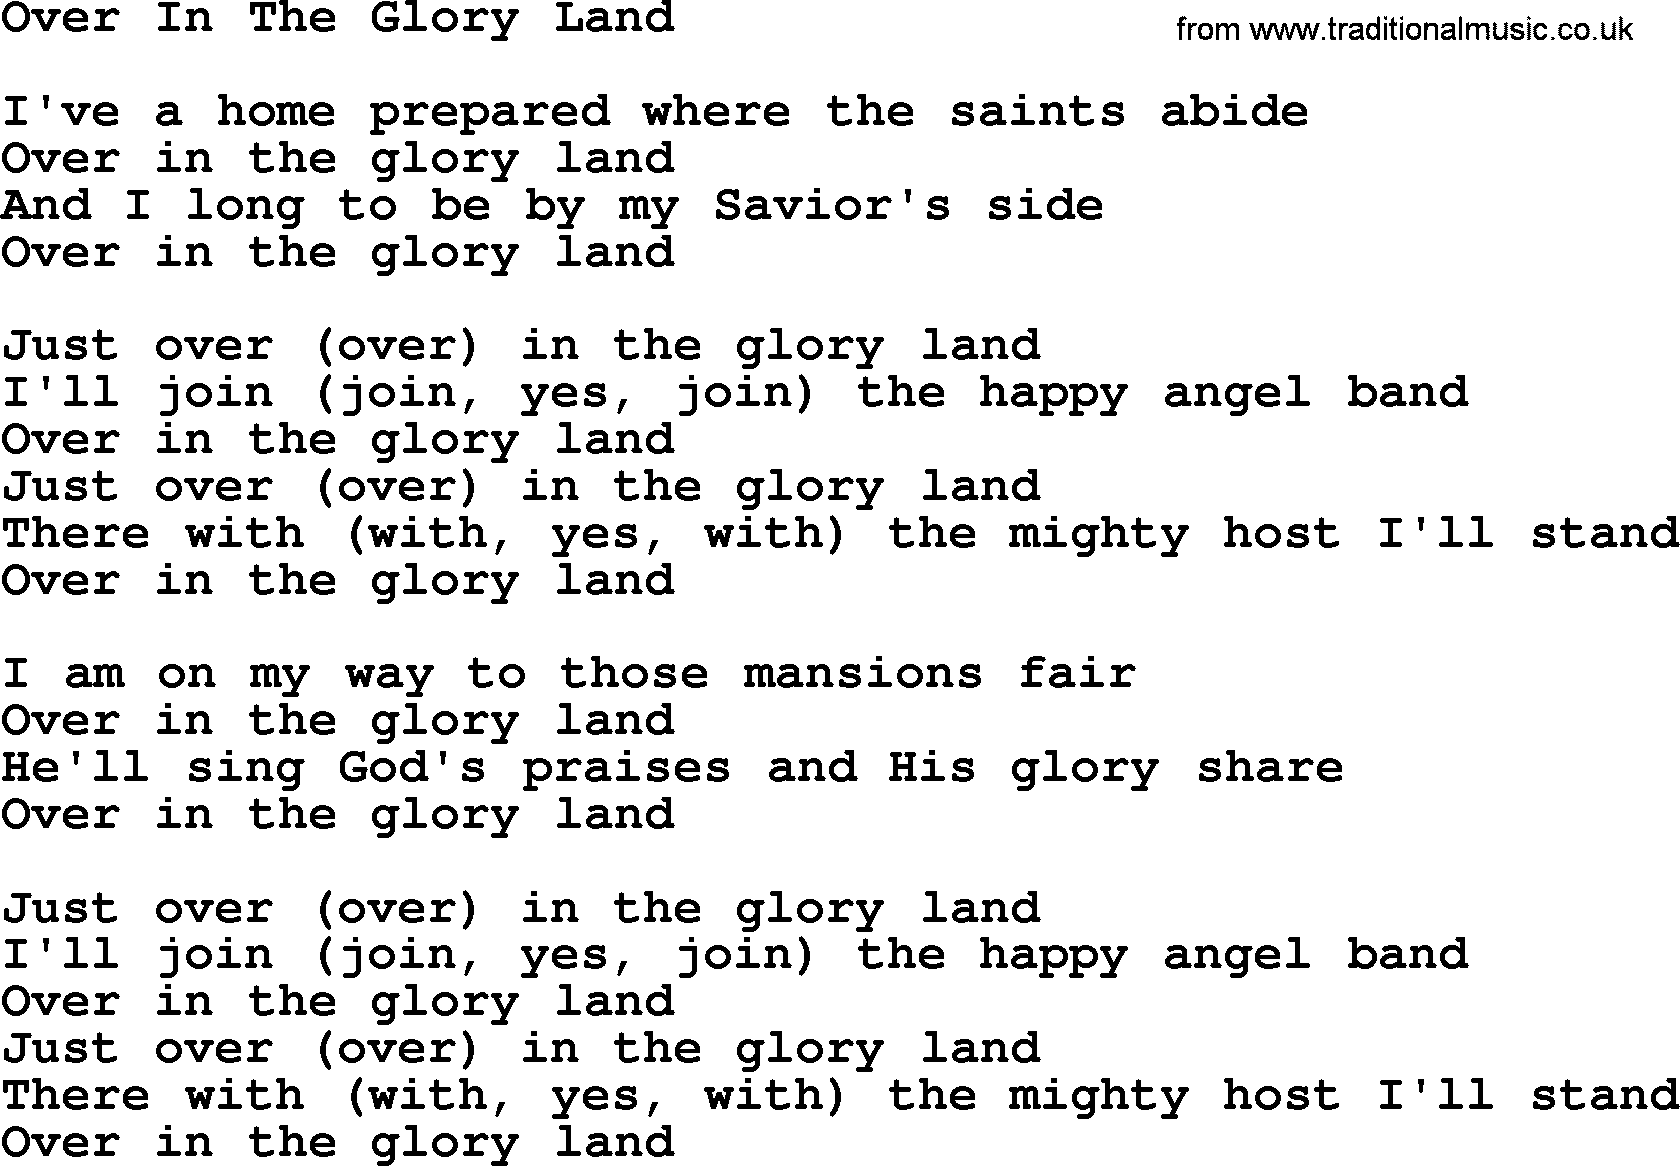 The Byrds song Over In The Glory Land, lyrics